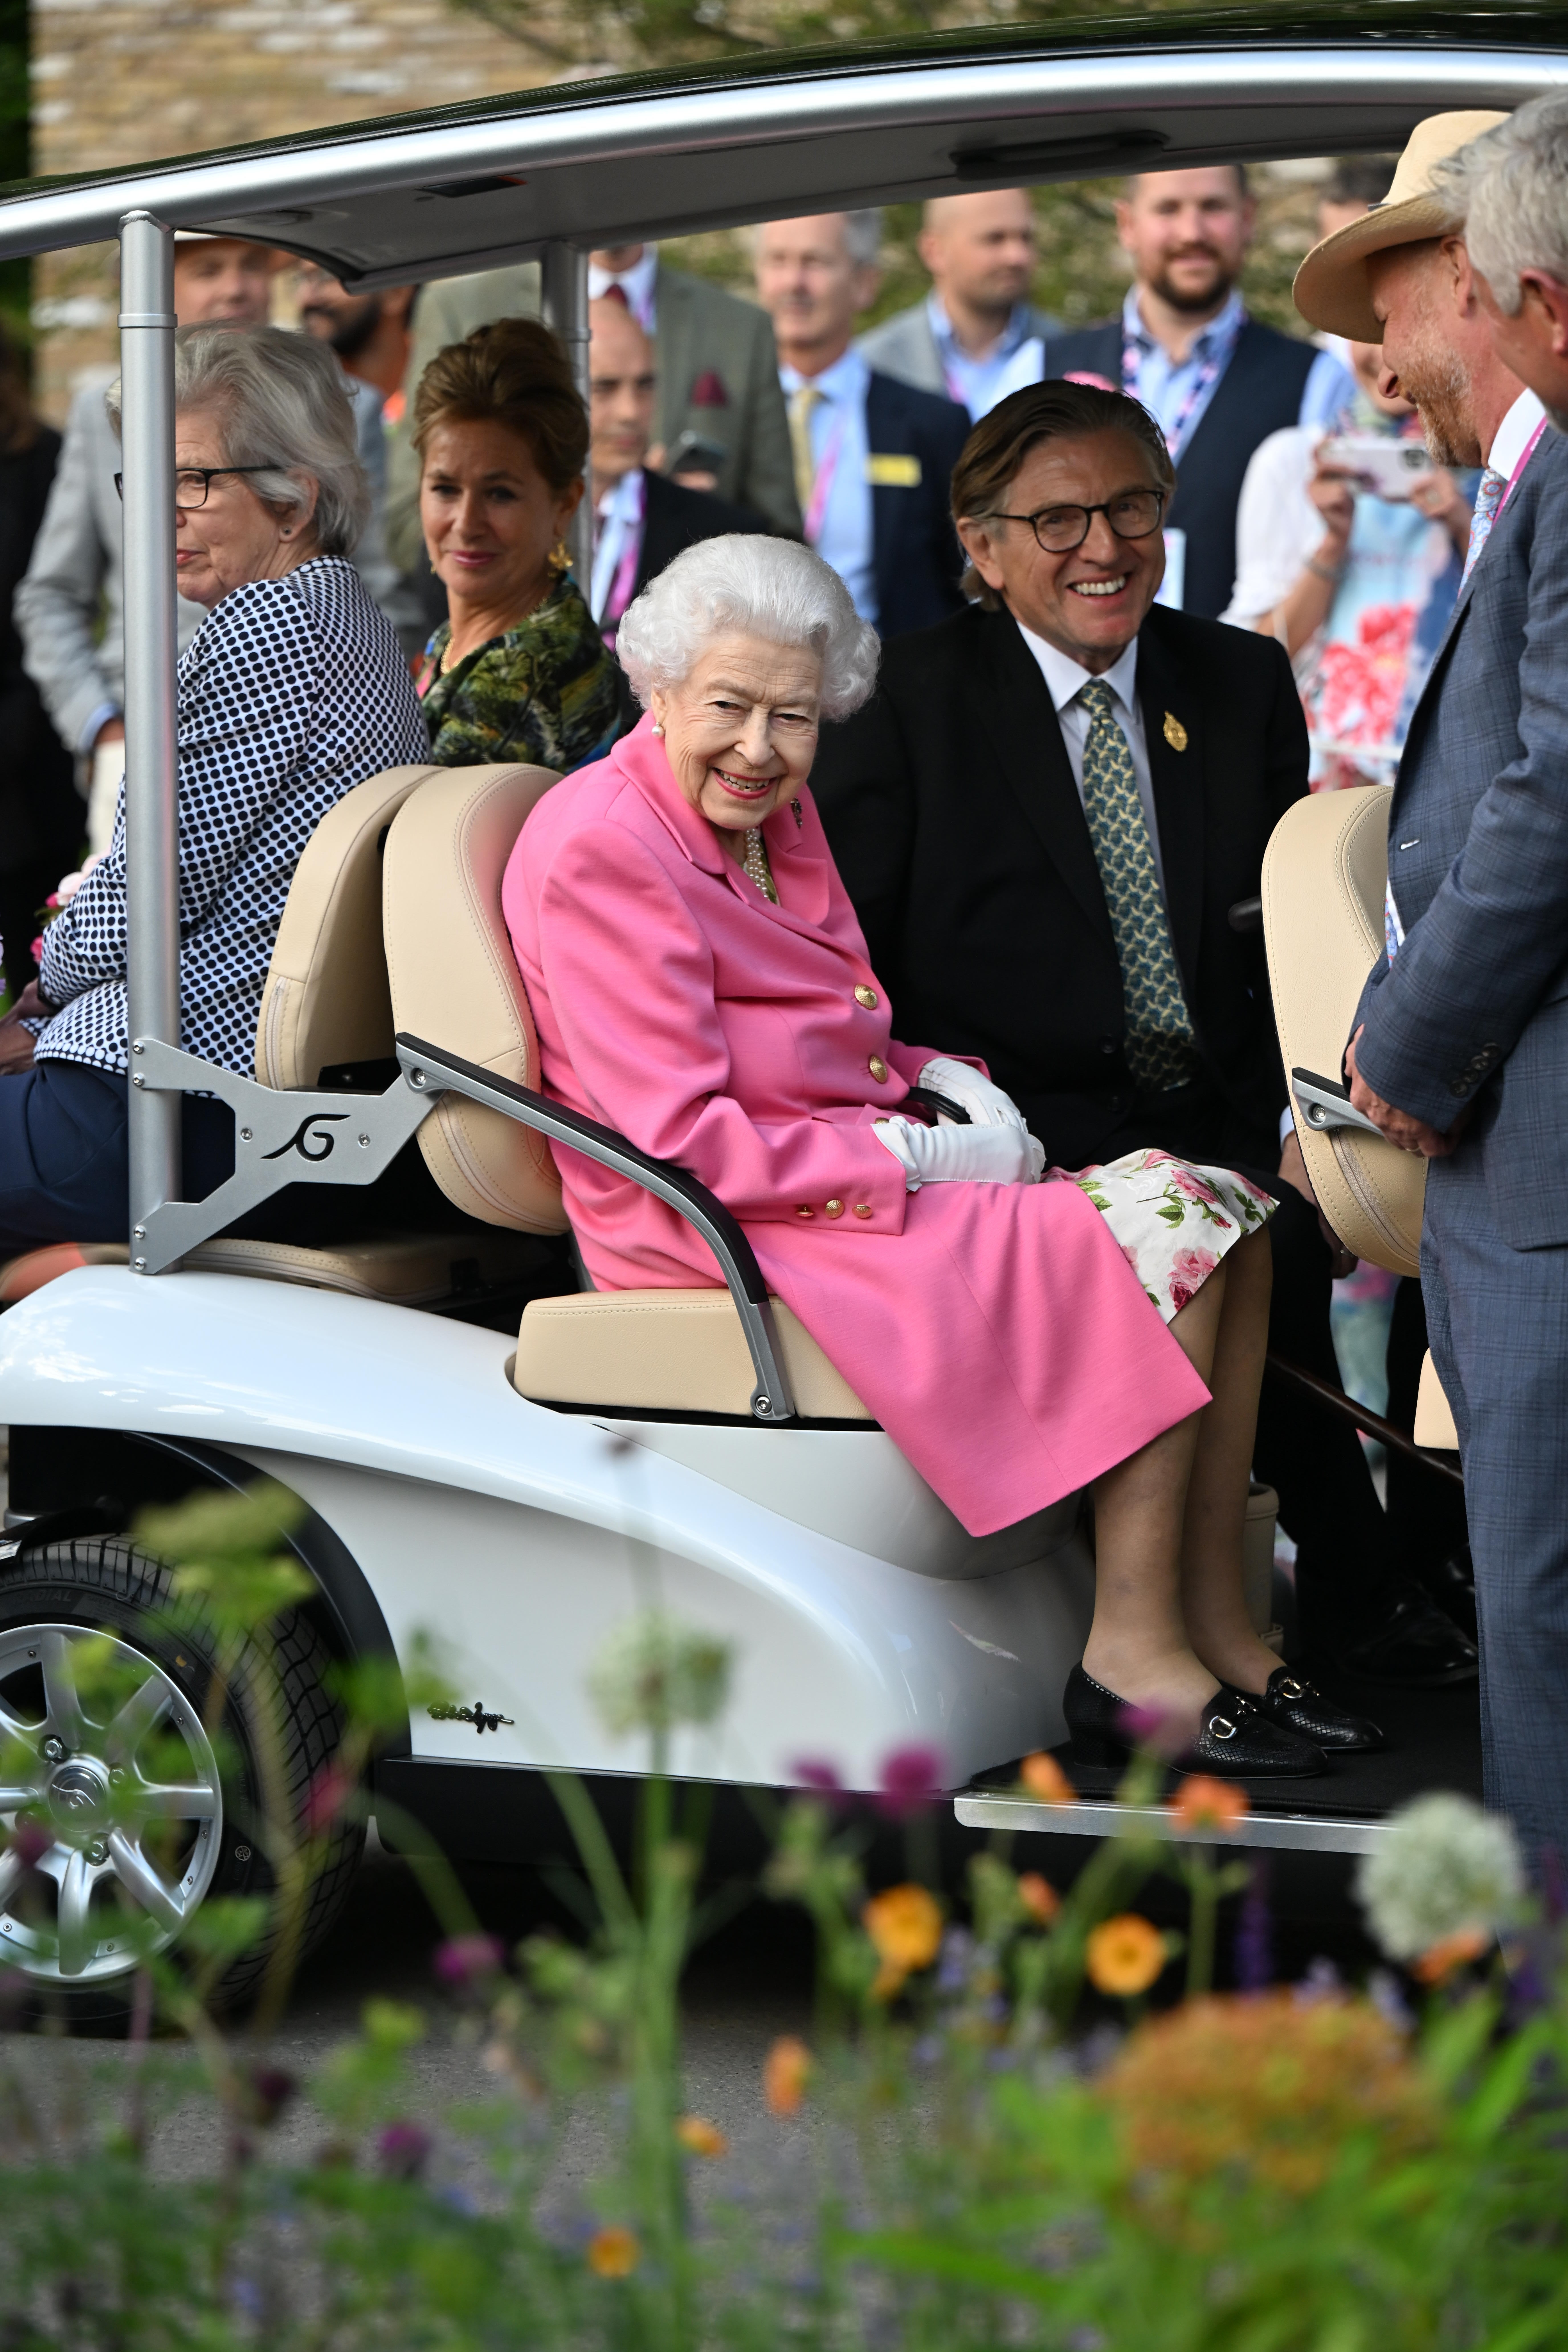 The Queen sitting in a buggy during a visit to the RHS Chelsea Flower Show (Paul Grover/Daily Telegraph/PA)